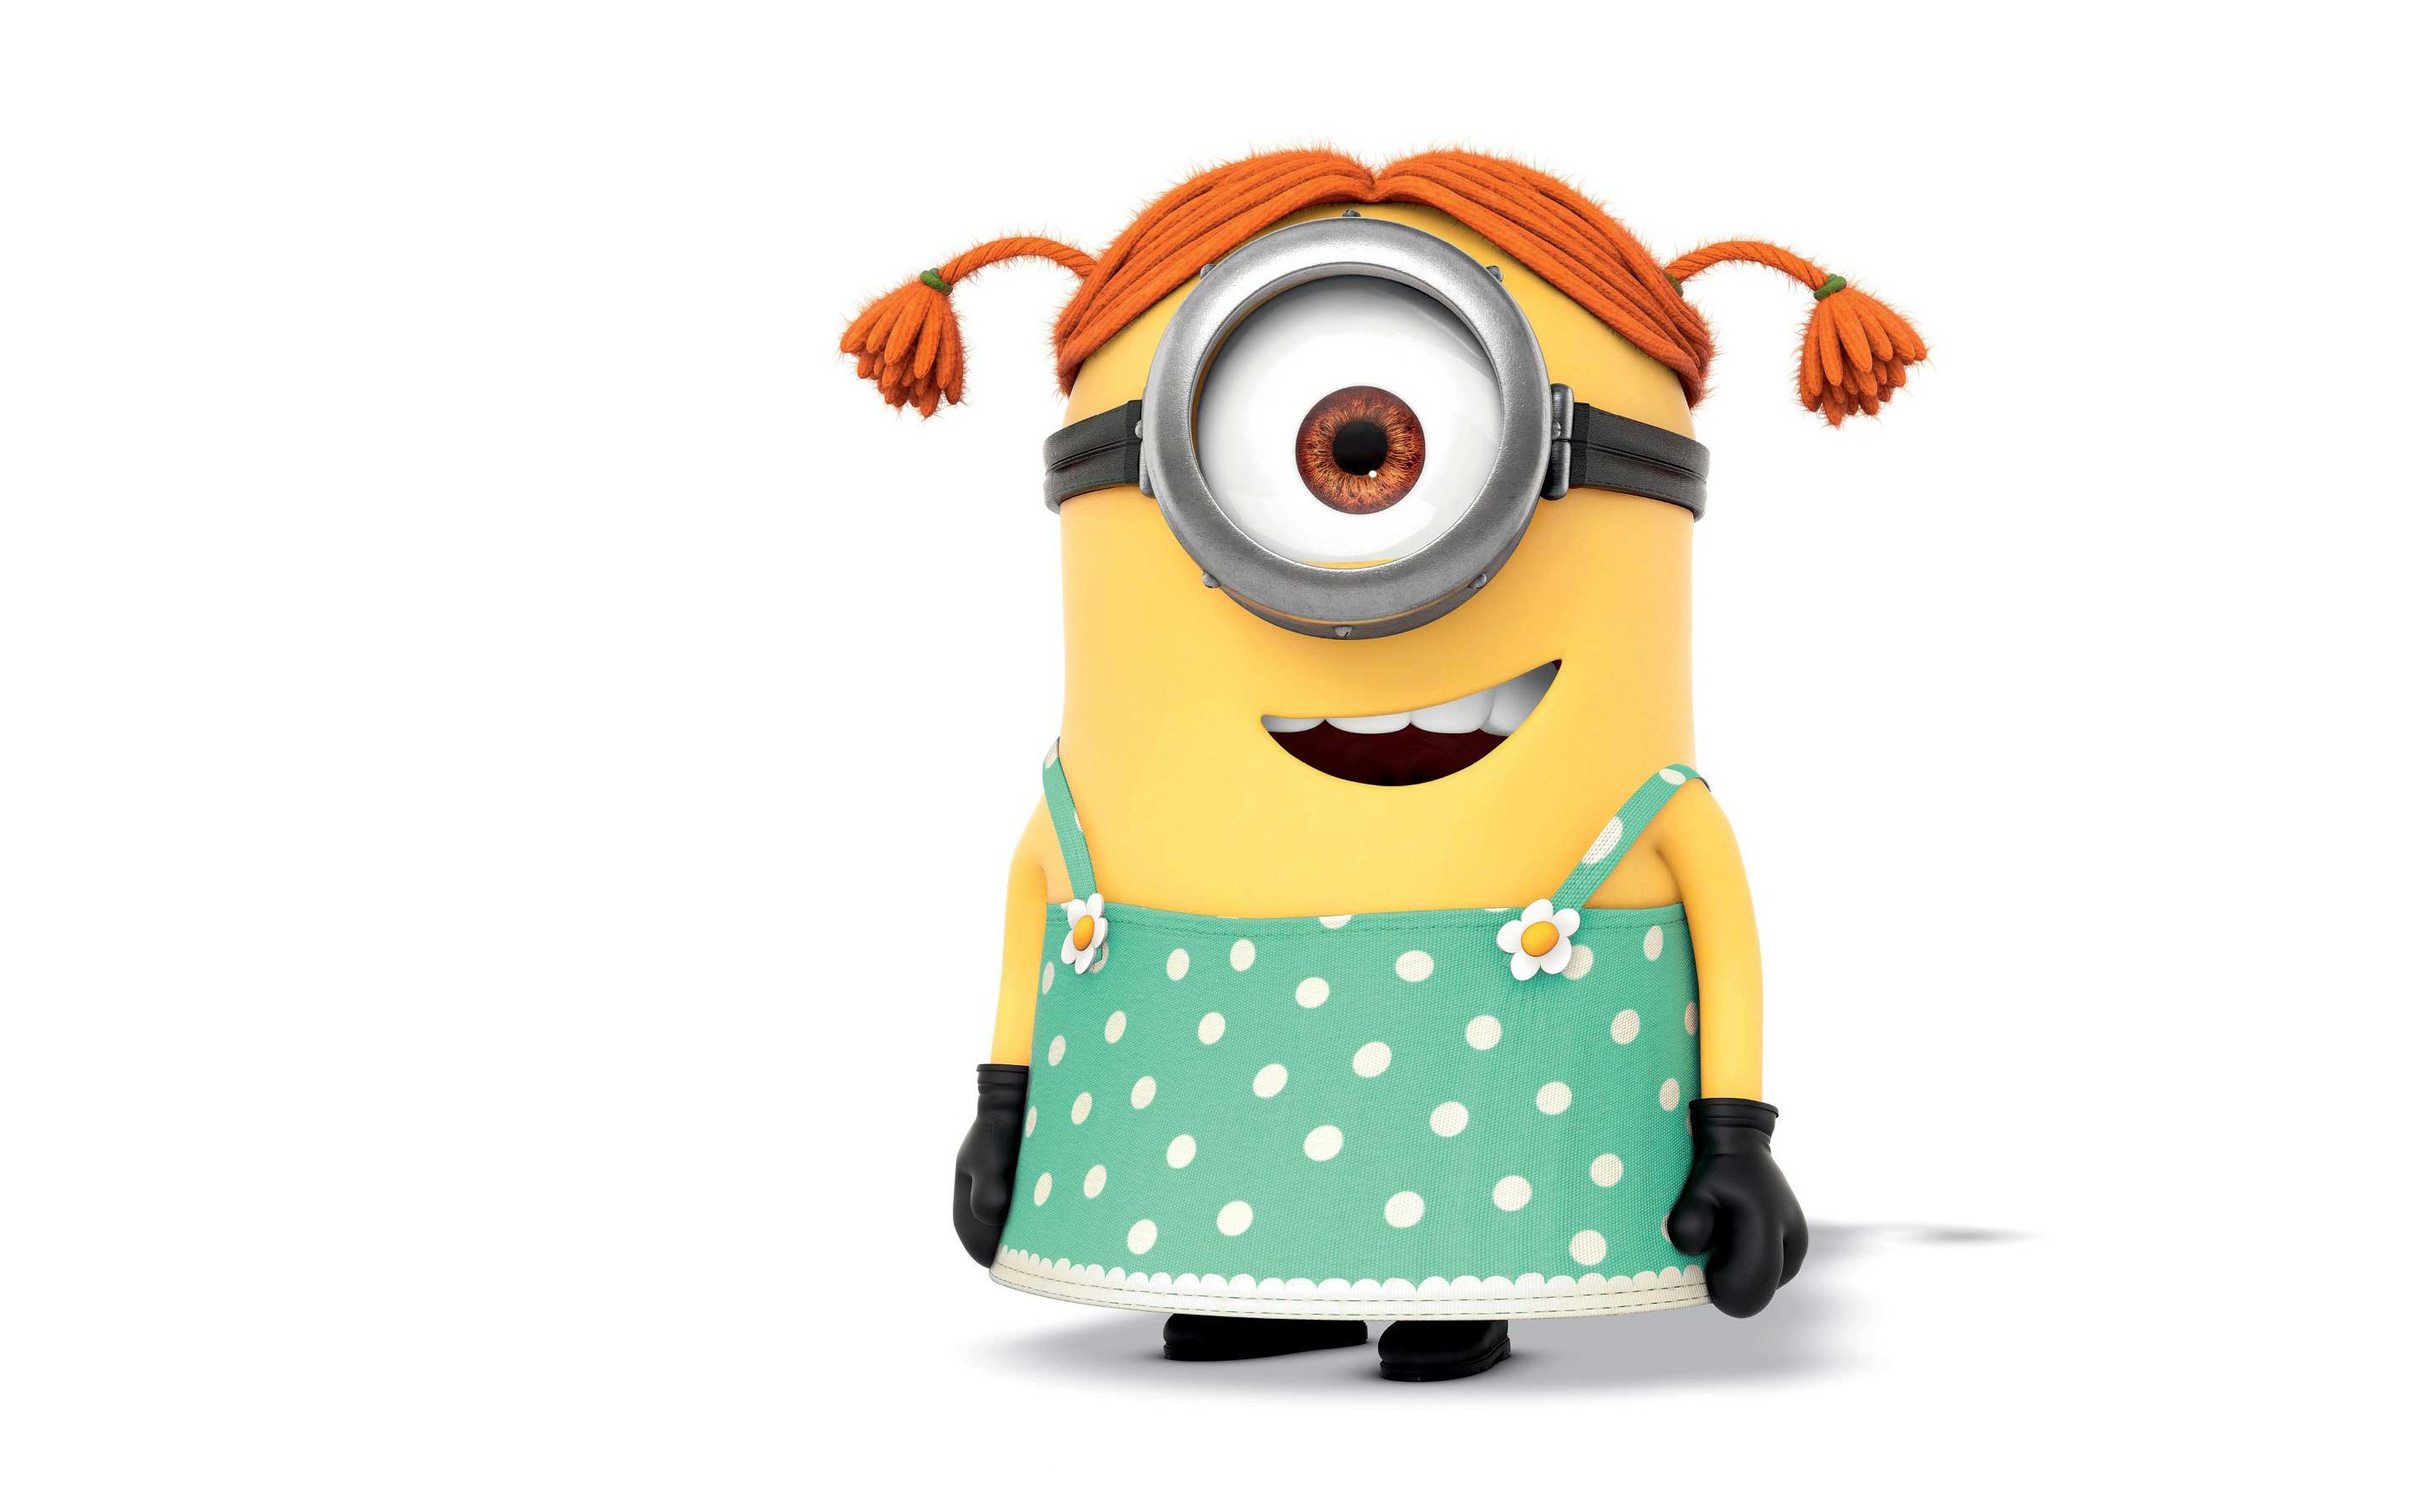 Cute-Minions-Wallpapers-Collection-009.jpg